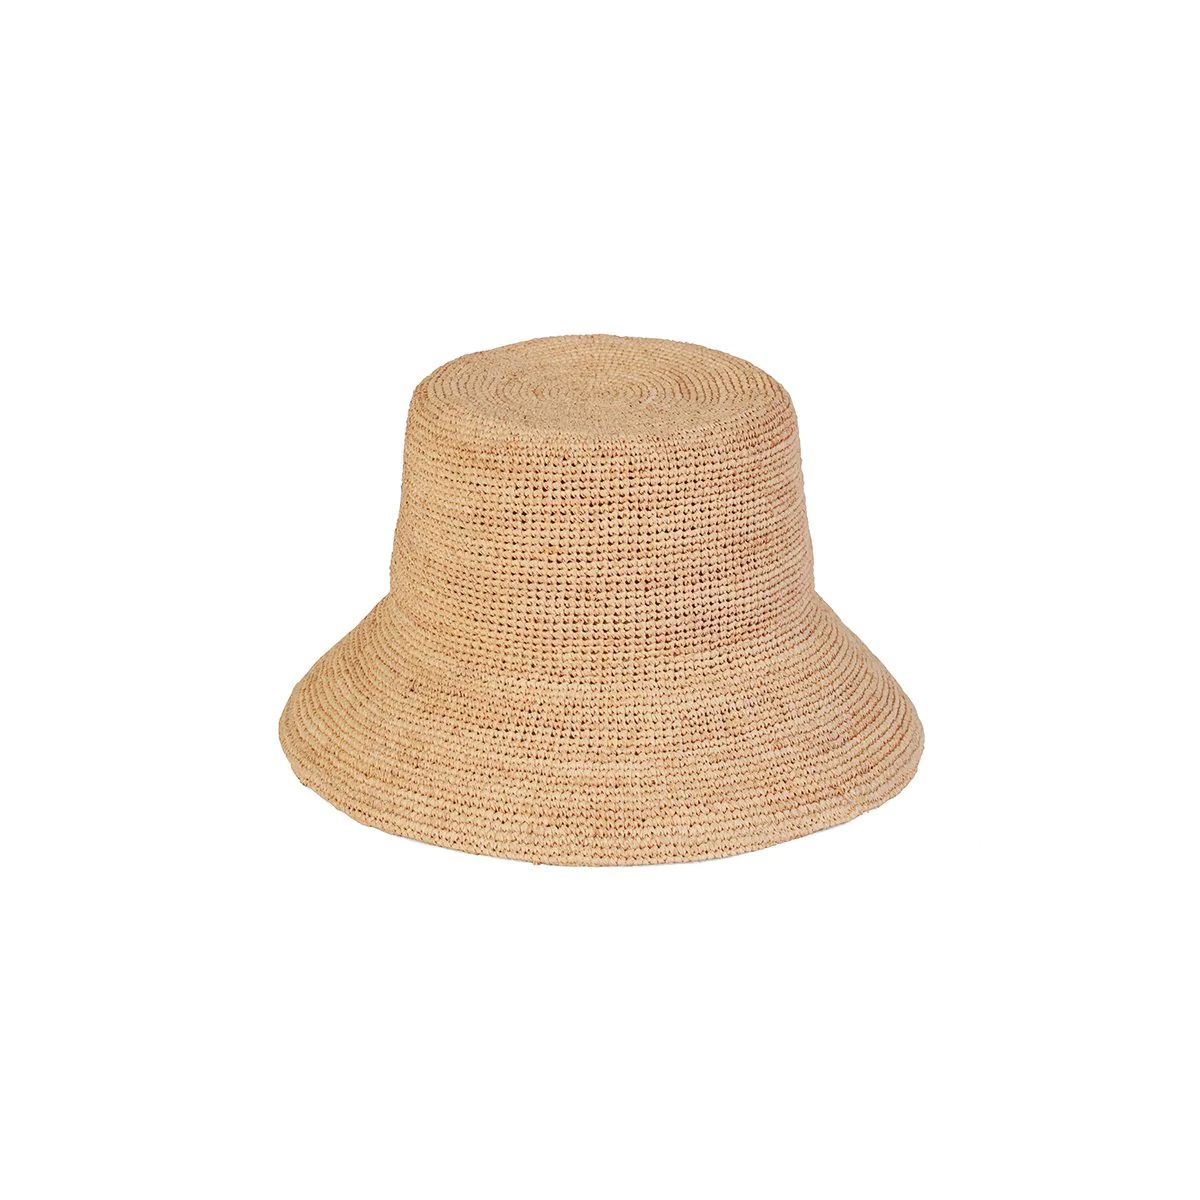 The Inca Bucket - Straw Bucket Hat in Natural | Lack of Color US | Lack of Color